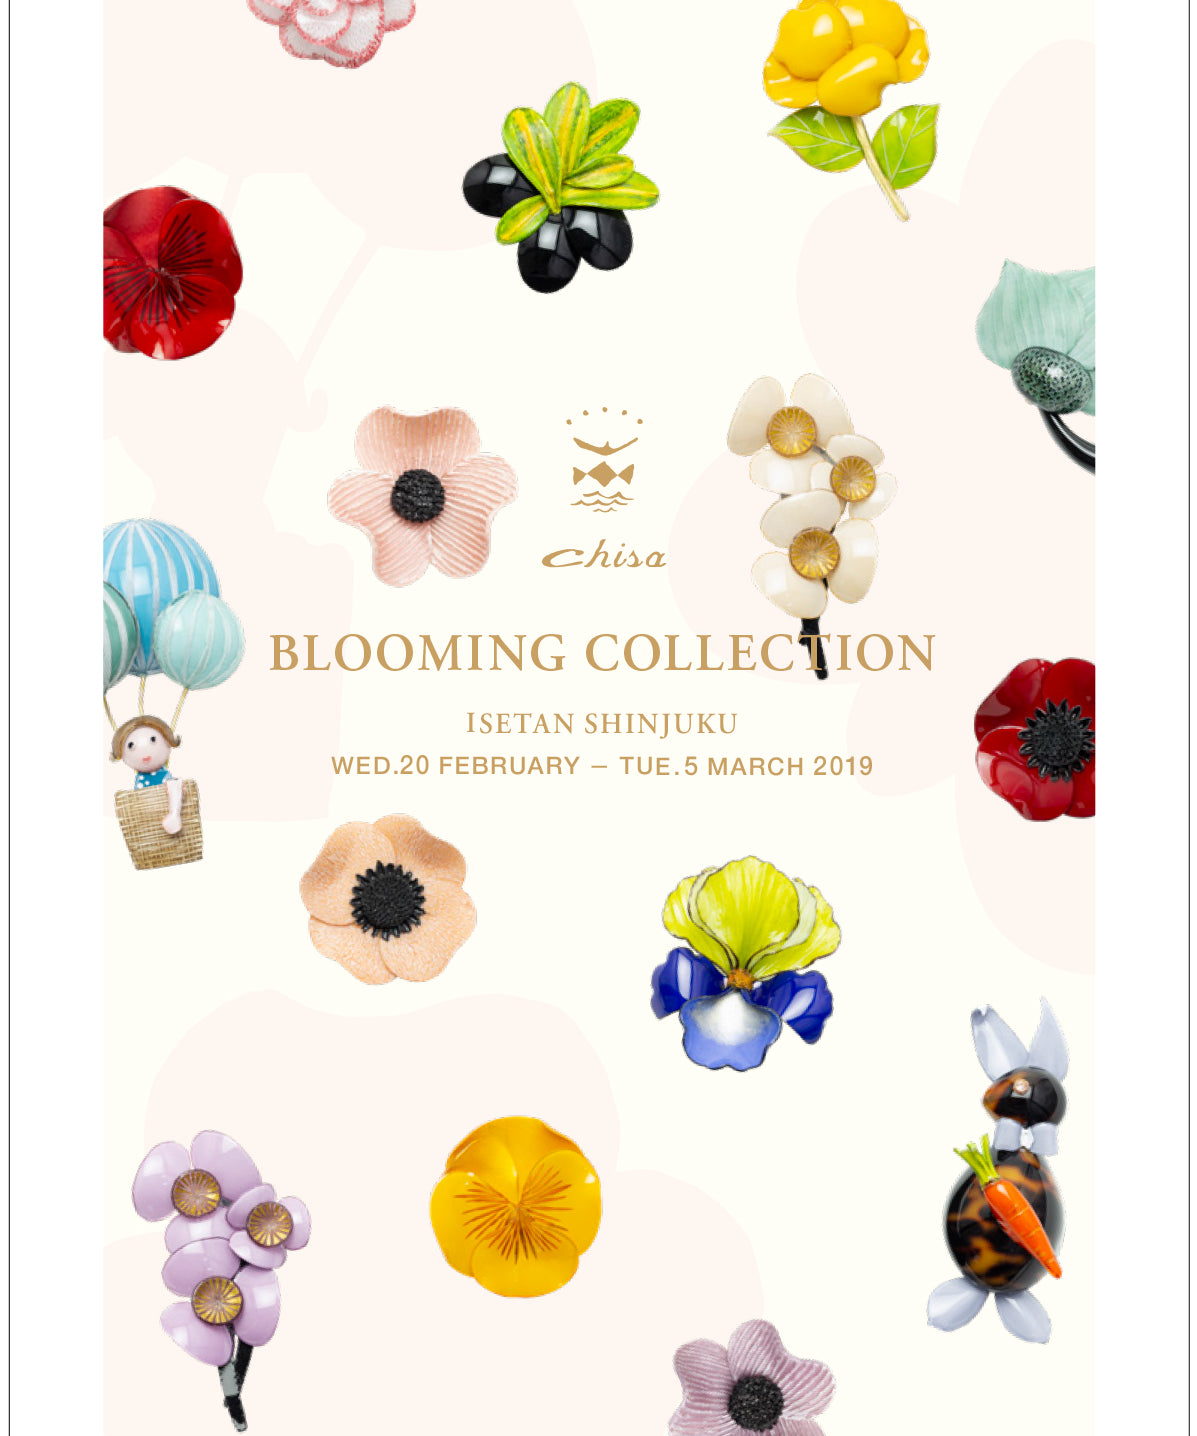 chisa BLOOMING COLLECTION in ISETAN